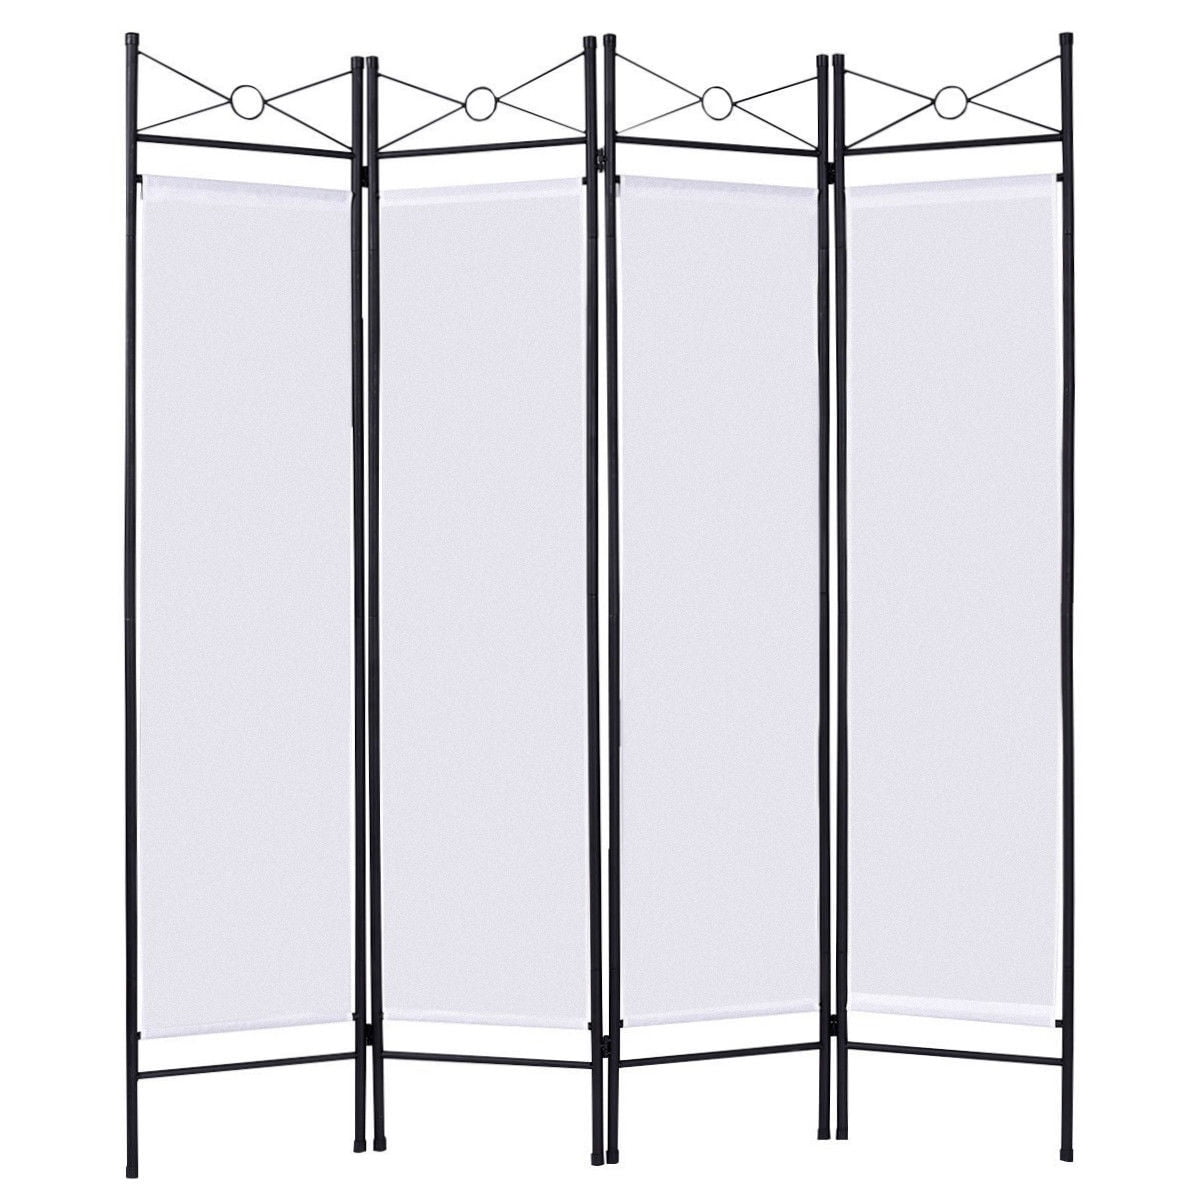 Room Divider 4 Panel Screen Folding Partition Privacy Fabric Metal Frame White 